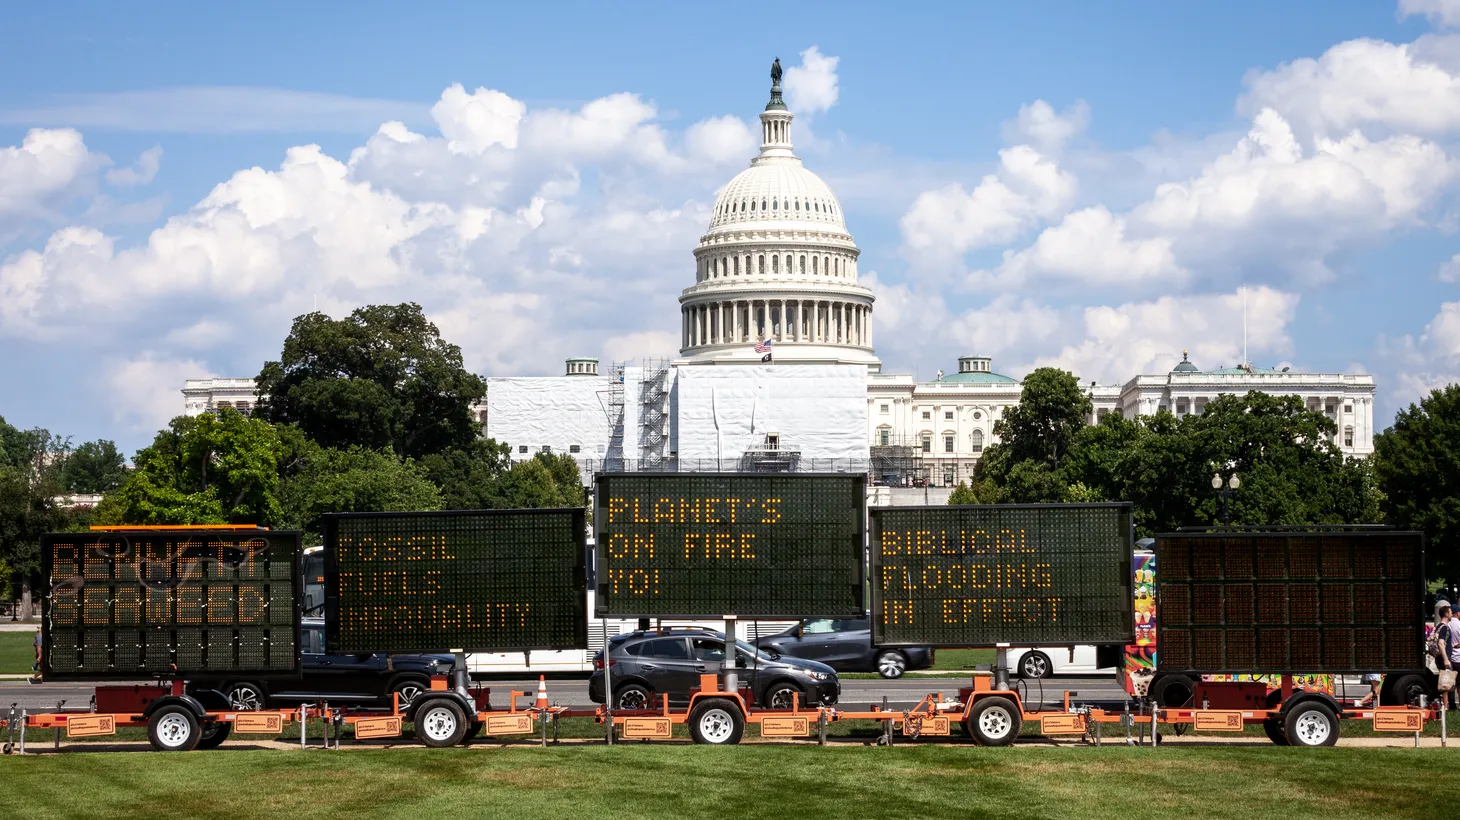 Road construction signs convey messages about climate change, as they’re parked in front of the U.S. Capitol ahead of the Senate's vote on the Inflation Reduction Act. The bill contains investments to address climate change, plus other tax, health care, and employment provisions.